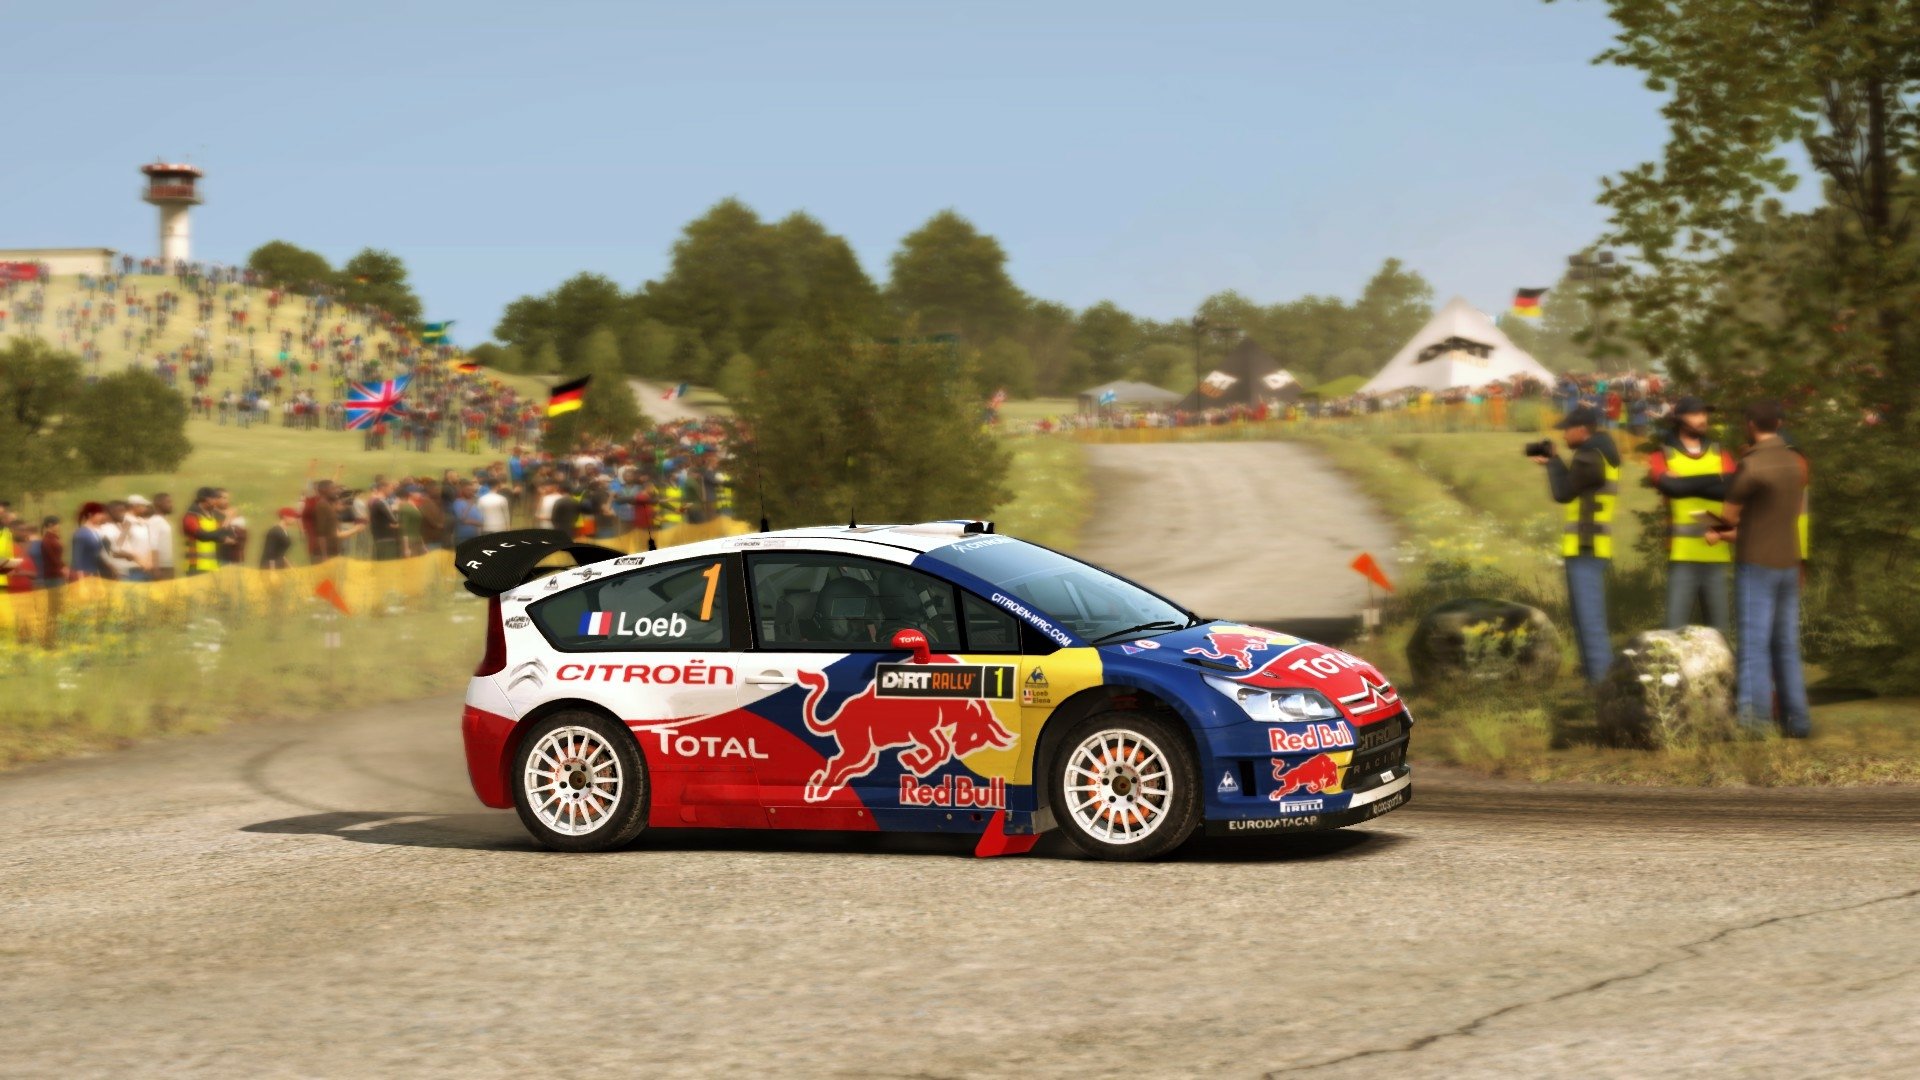 1920x1080 dirt rally background